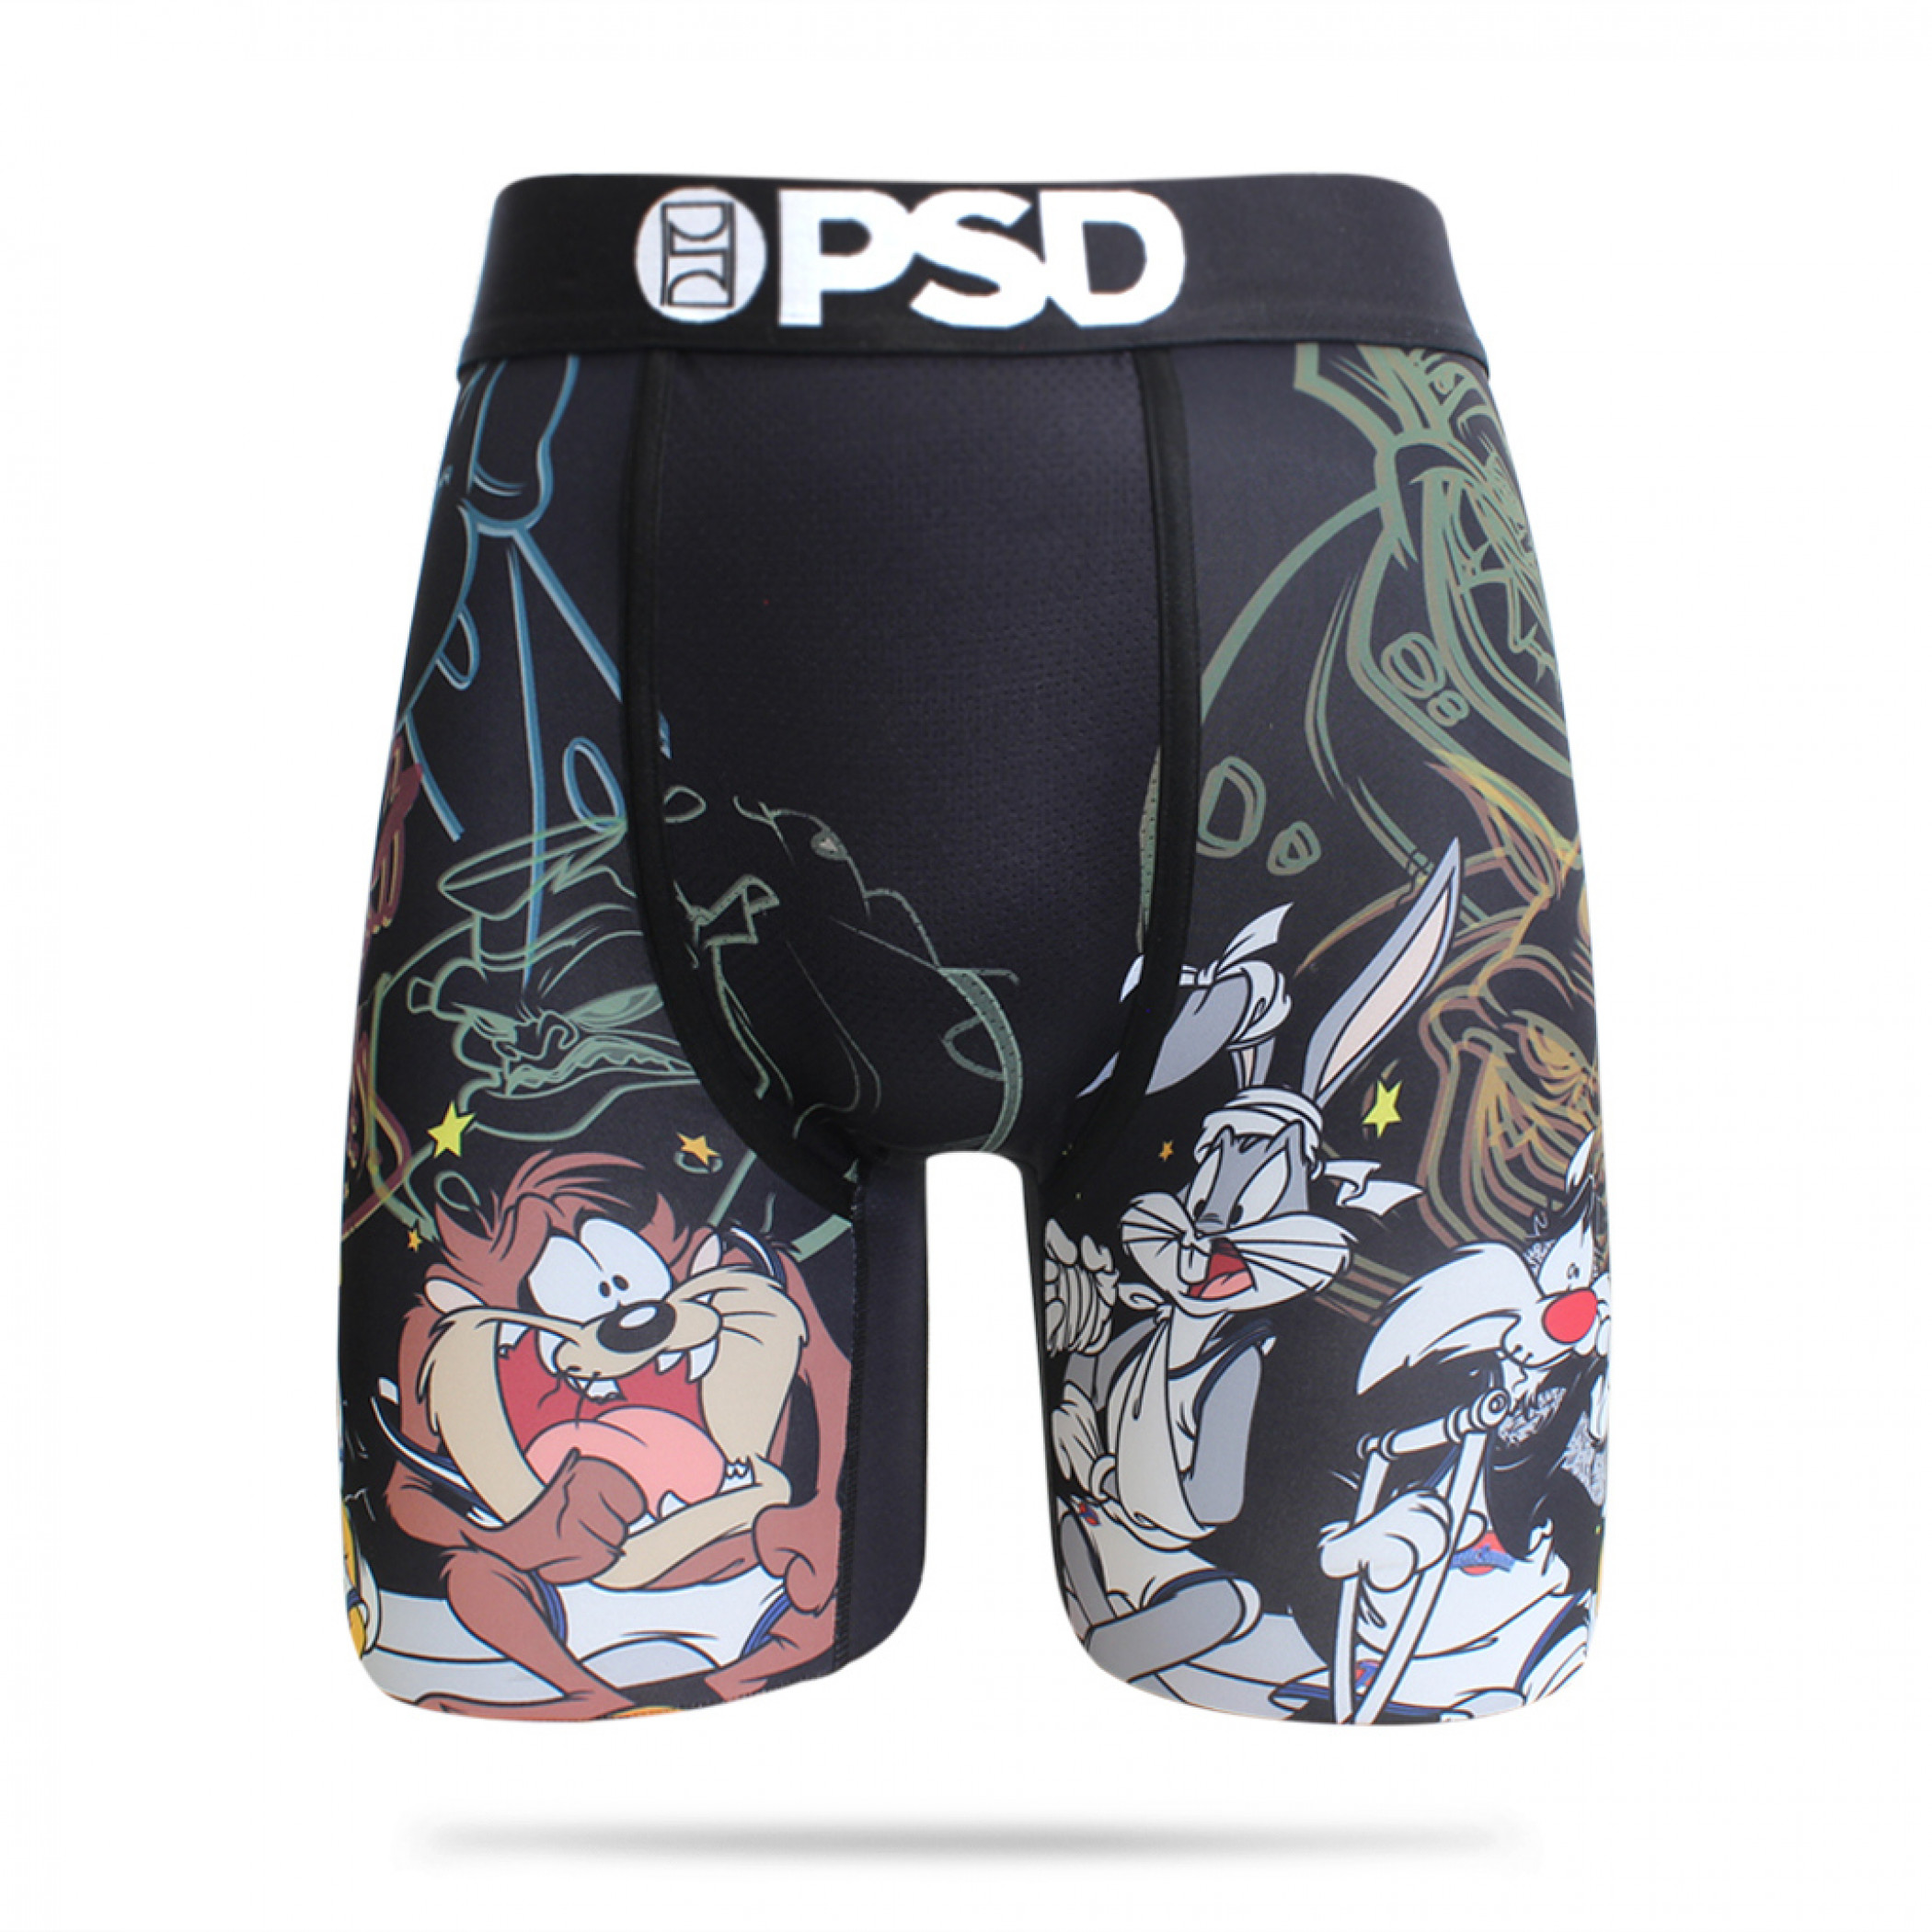 Space Jam Injured Toon Squad PSD Boxers Briefs